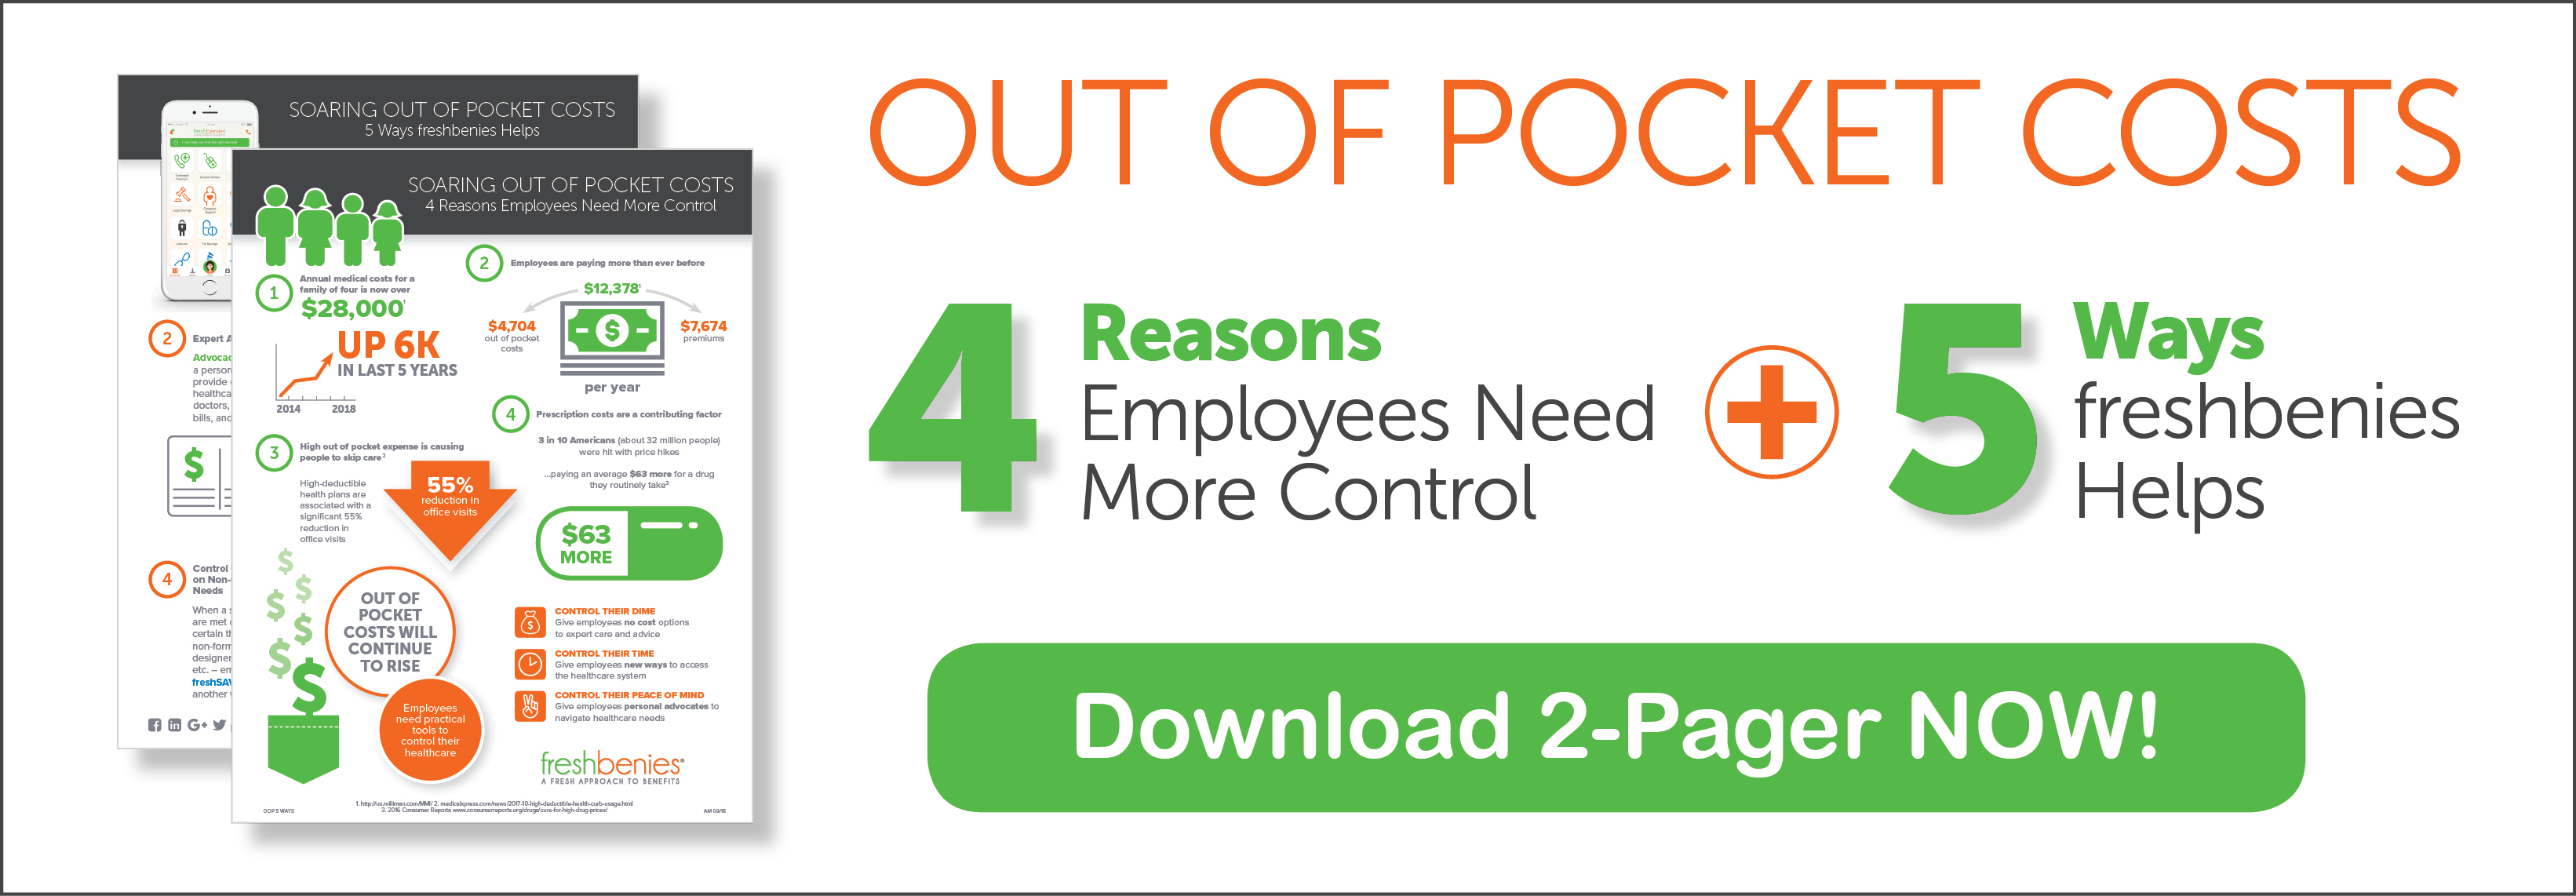 5 Ways freshbenies Helps Employees with Out of Pocket costs